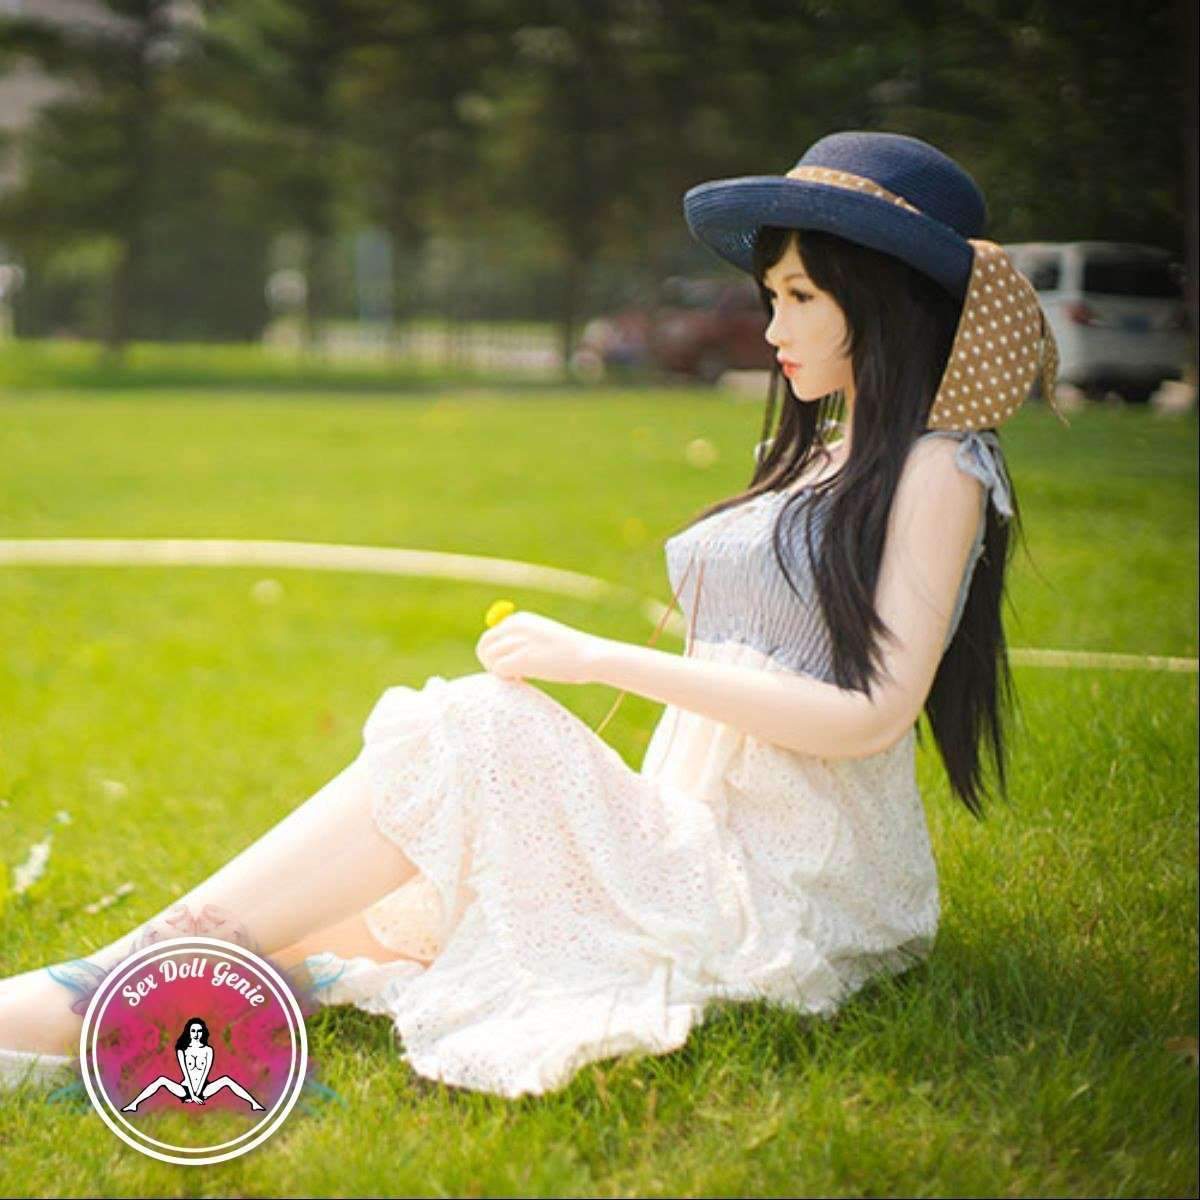 DS Doll - 163Plus - Jiayi Head - Type 2 D Cup Silicone Doll-6